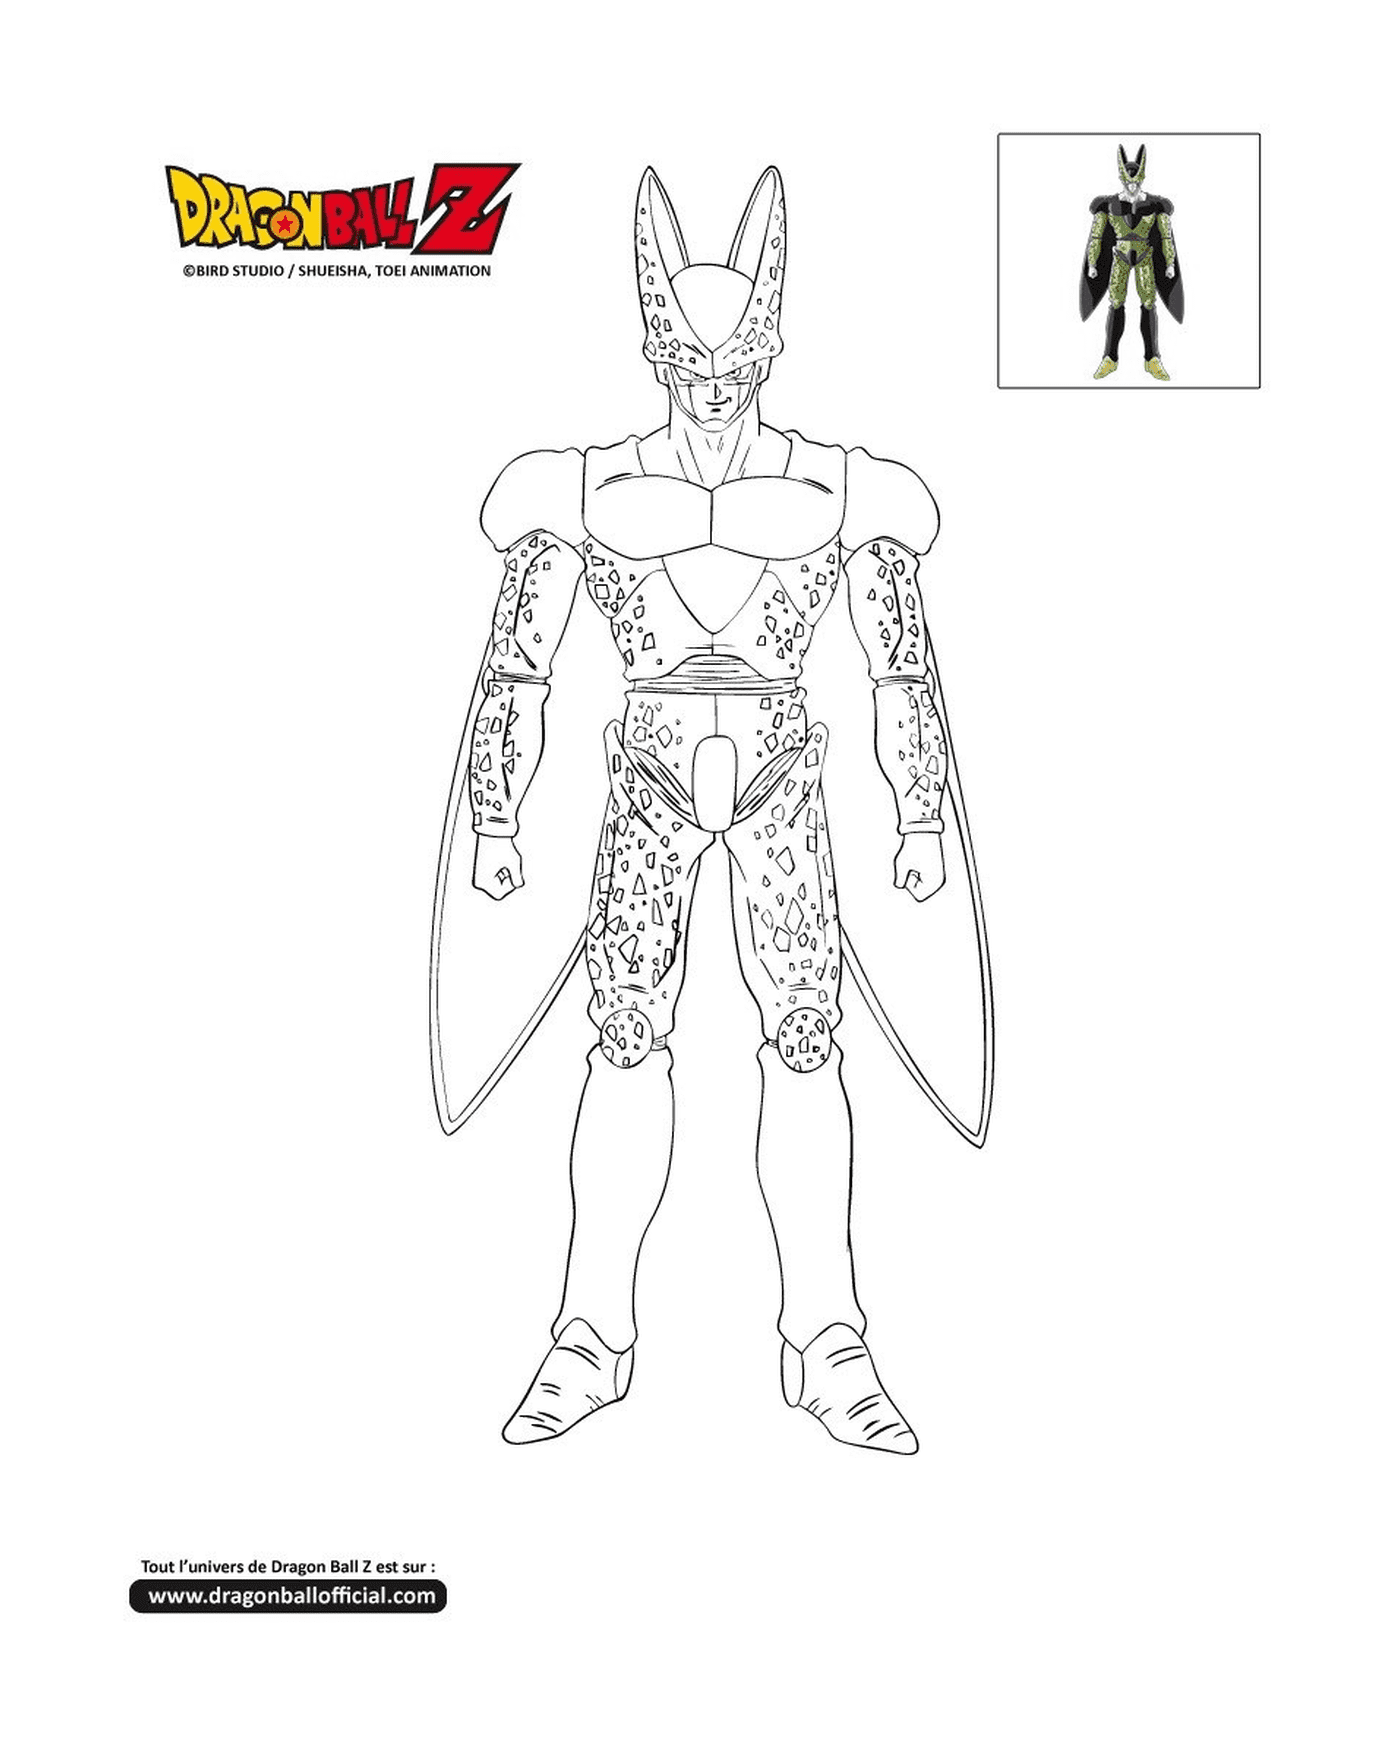  Cell, a character from Dragon Ball Z 